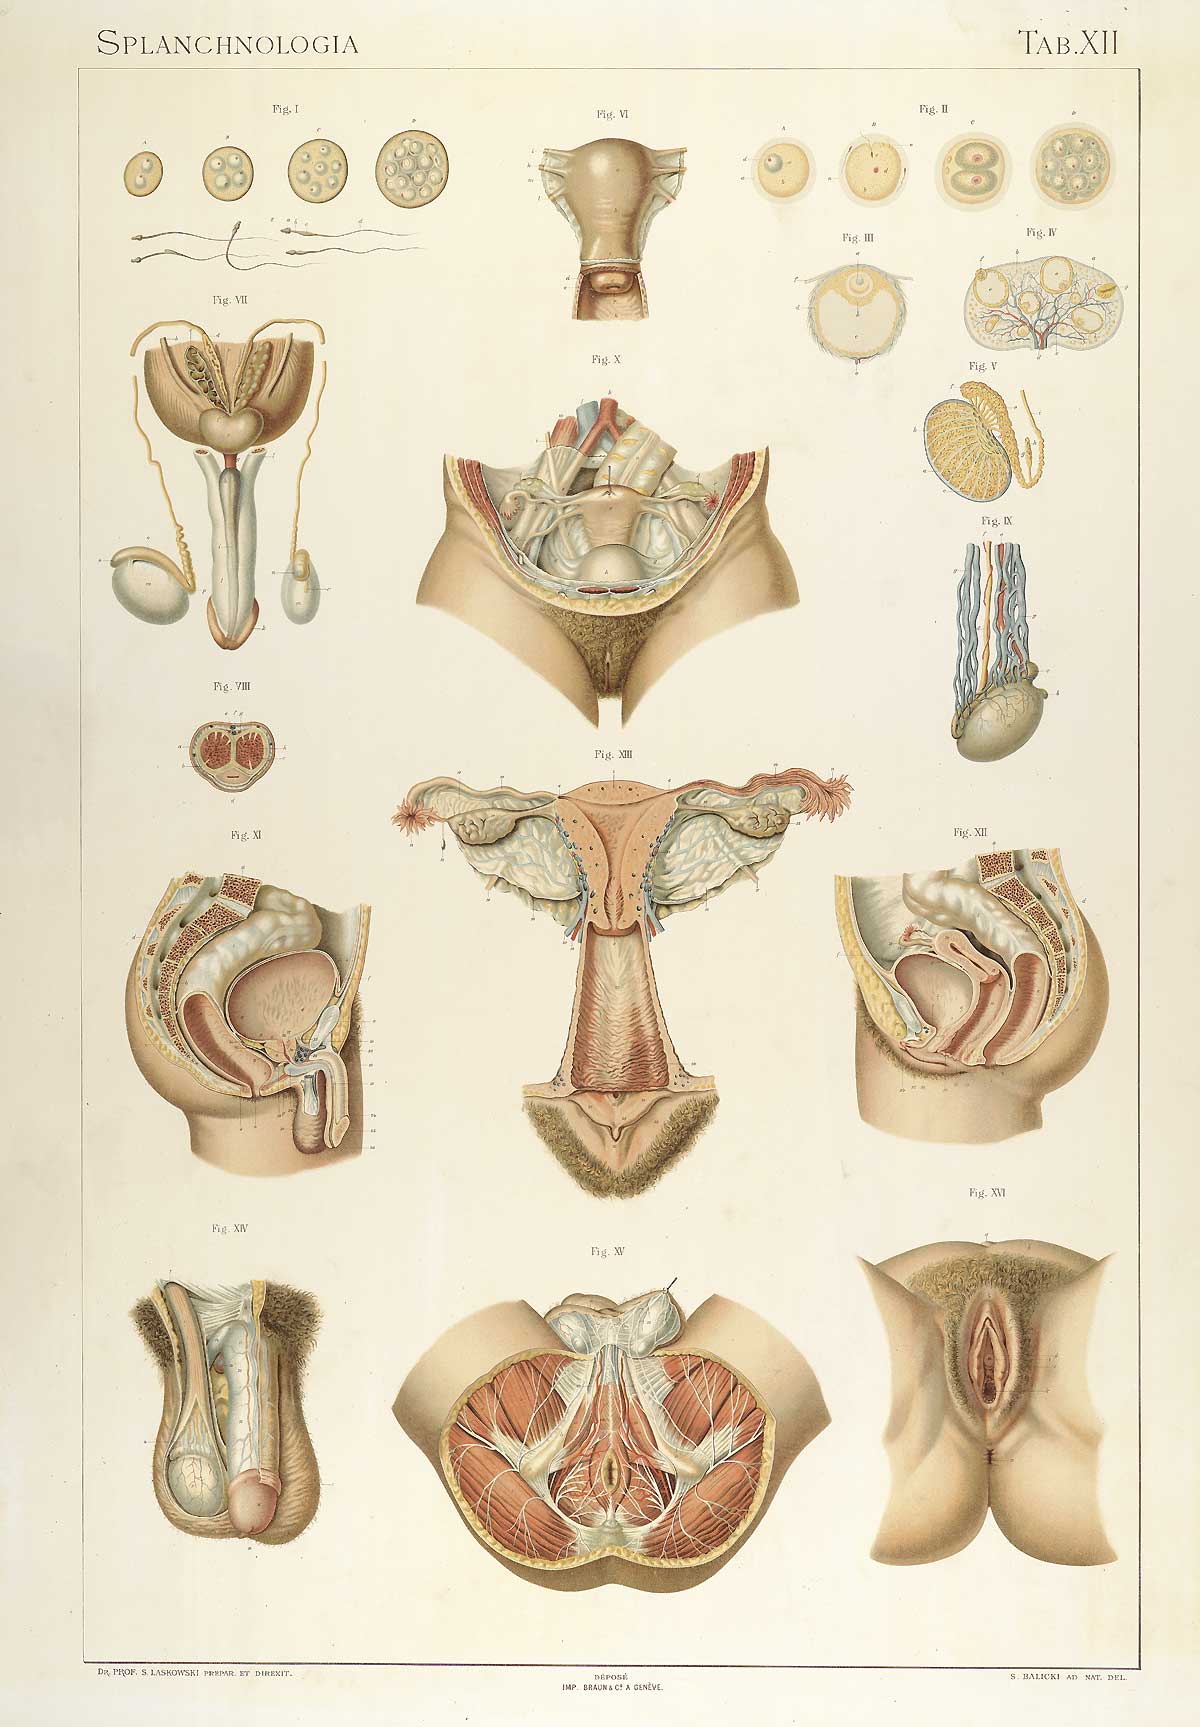 Plate 12 of Sigismond Laskowski's Anatomie normale du corps humain, featuring the interior and exterior images of the male and female reproductive systems.